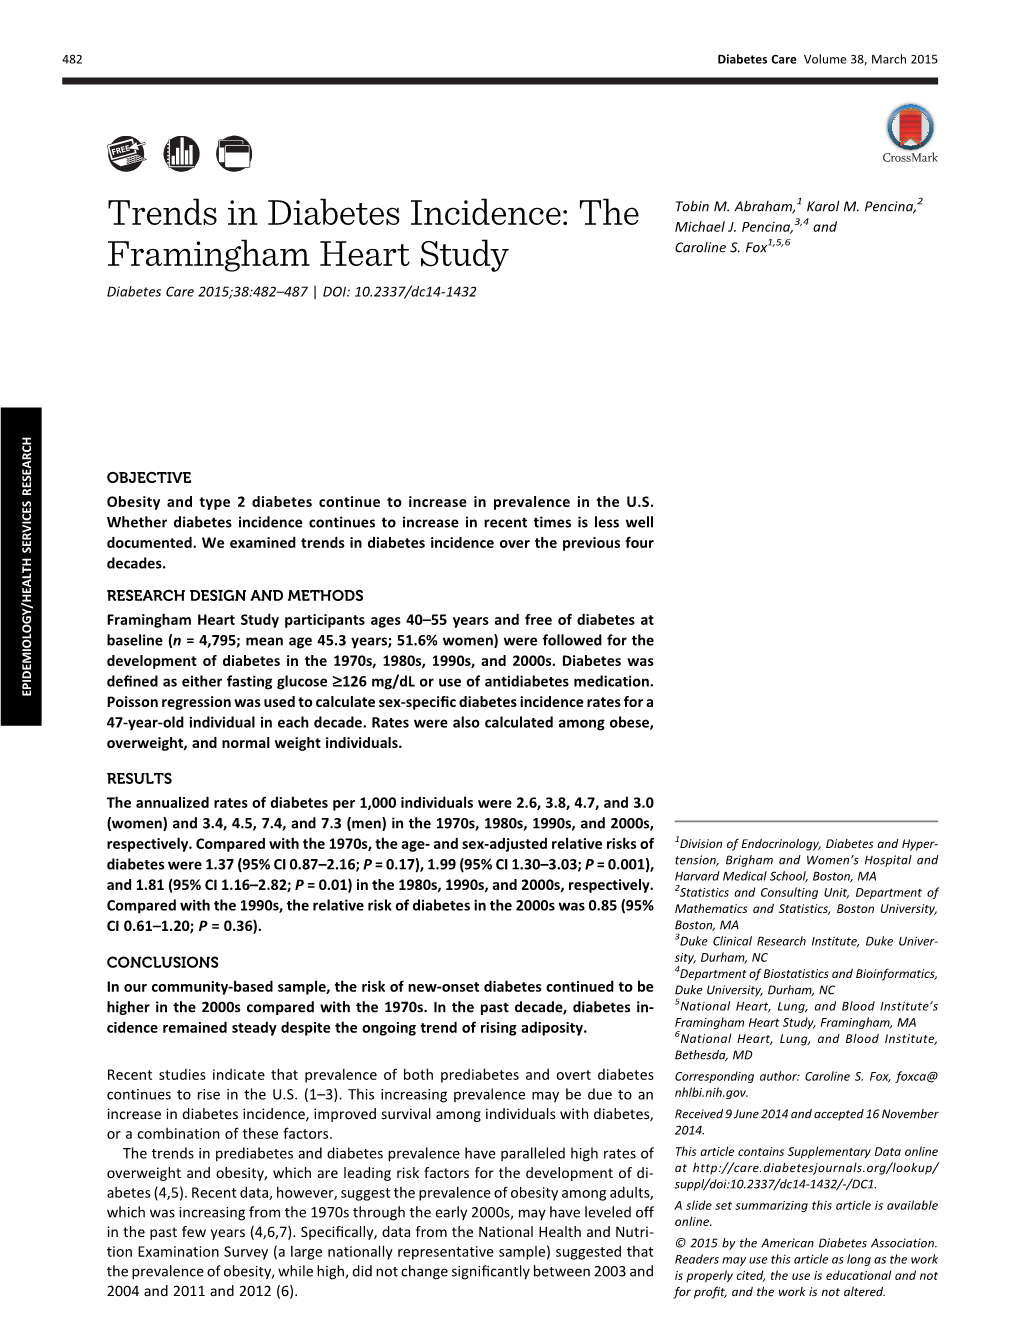 Trends in Diabetes Incidence: the Michael J